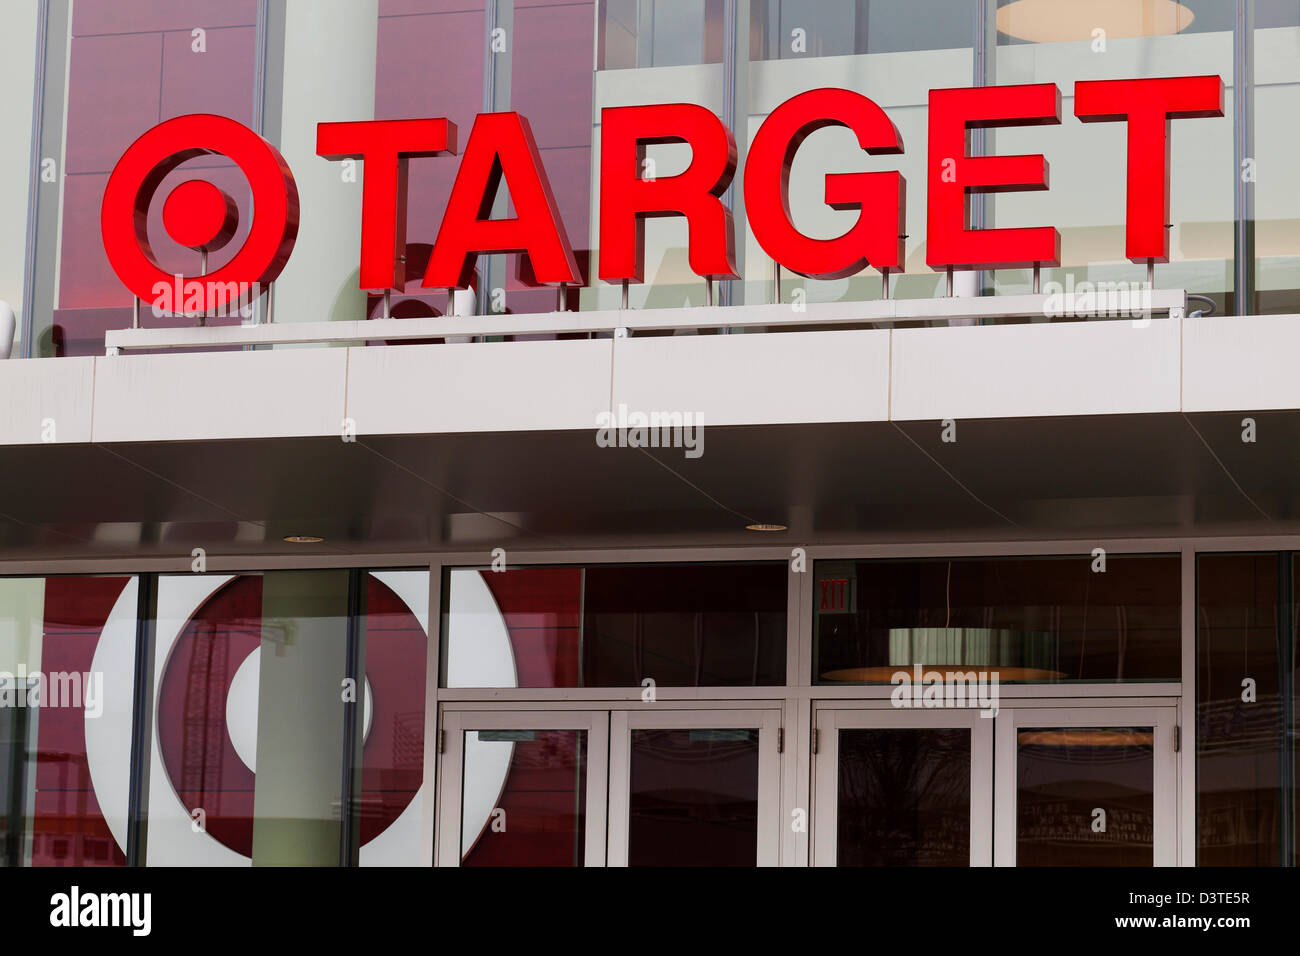 Target storefront sign Stock Photo